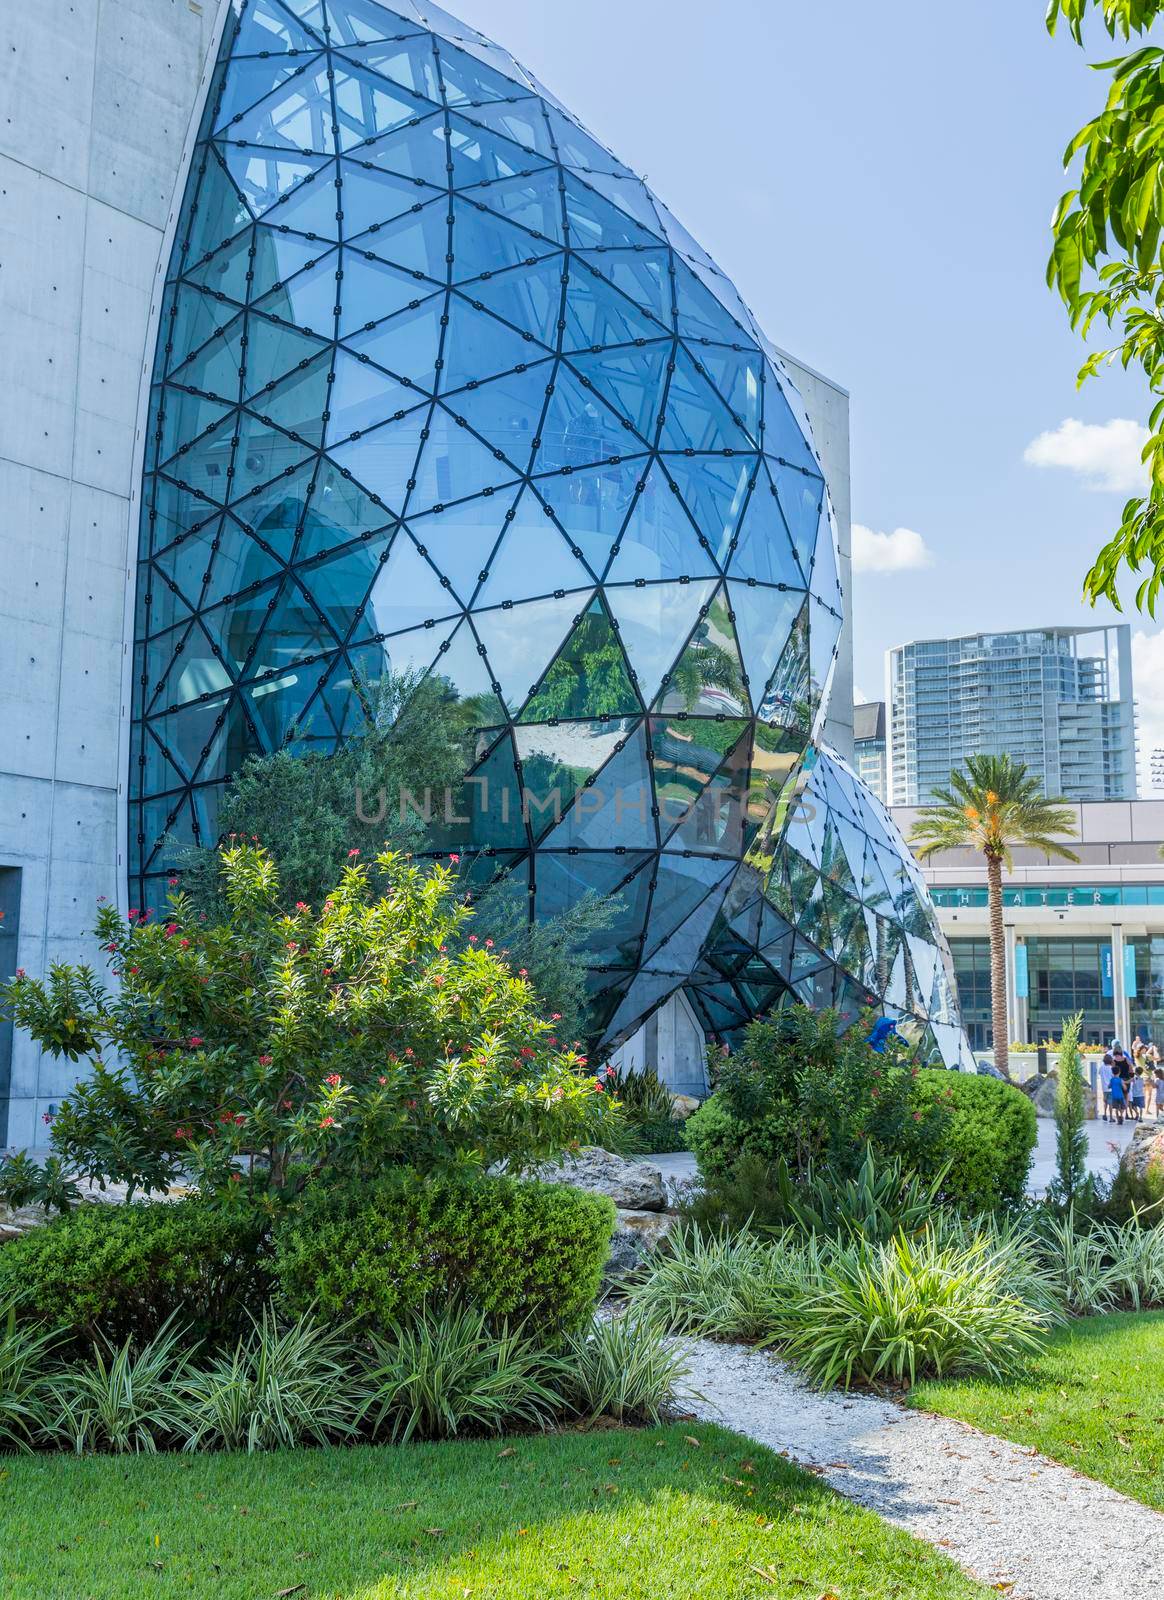 ST. PETERSBURG, FLORIDA - SEPTEMBER 2: Exterior of Salvador Dali Museum September 02, 2014 in St. Petersburg, FL. The museum has one of the largest collection of the works of Salvador Dali in the world. by Mariakray